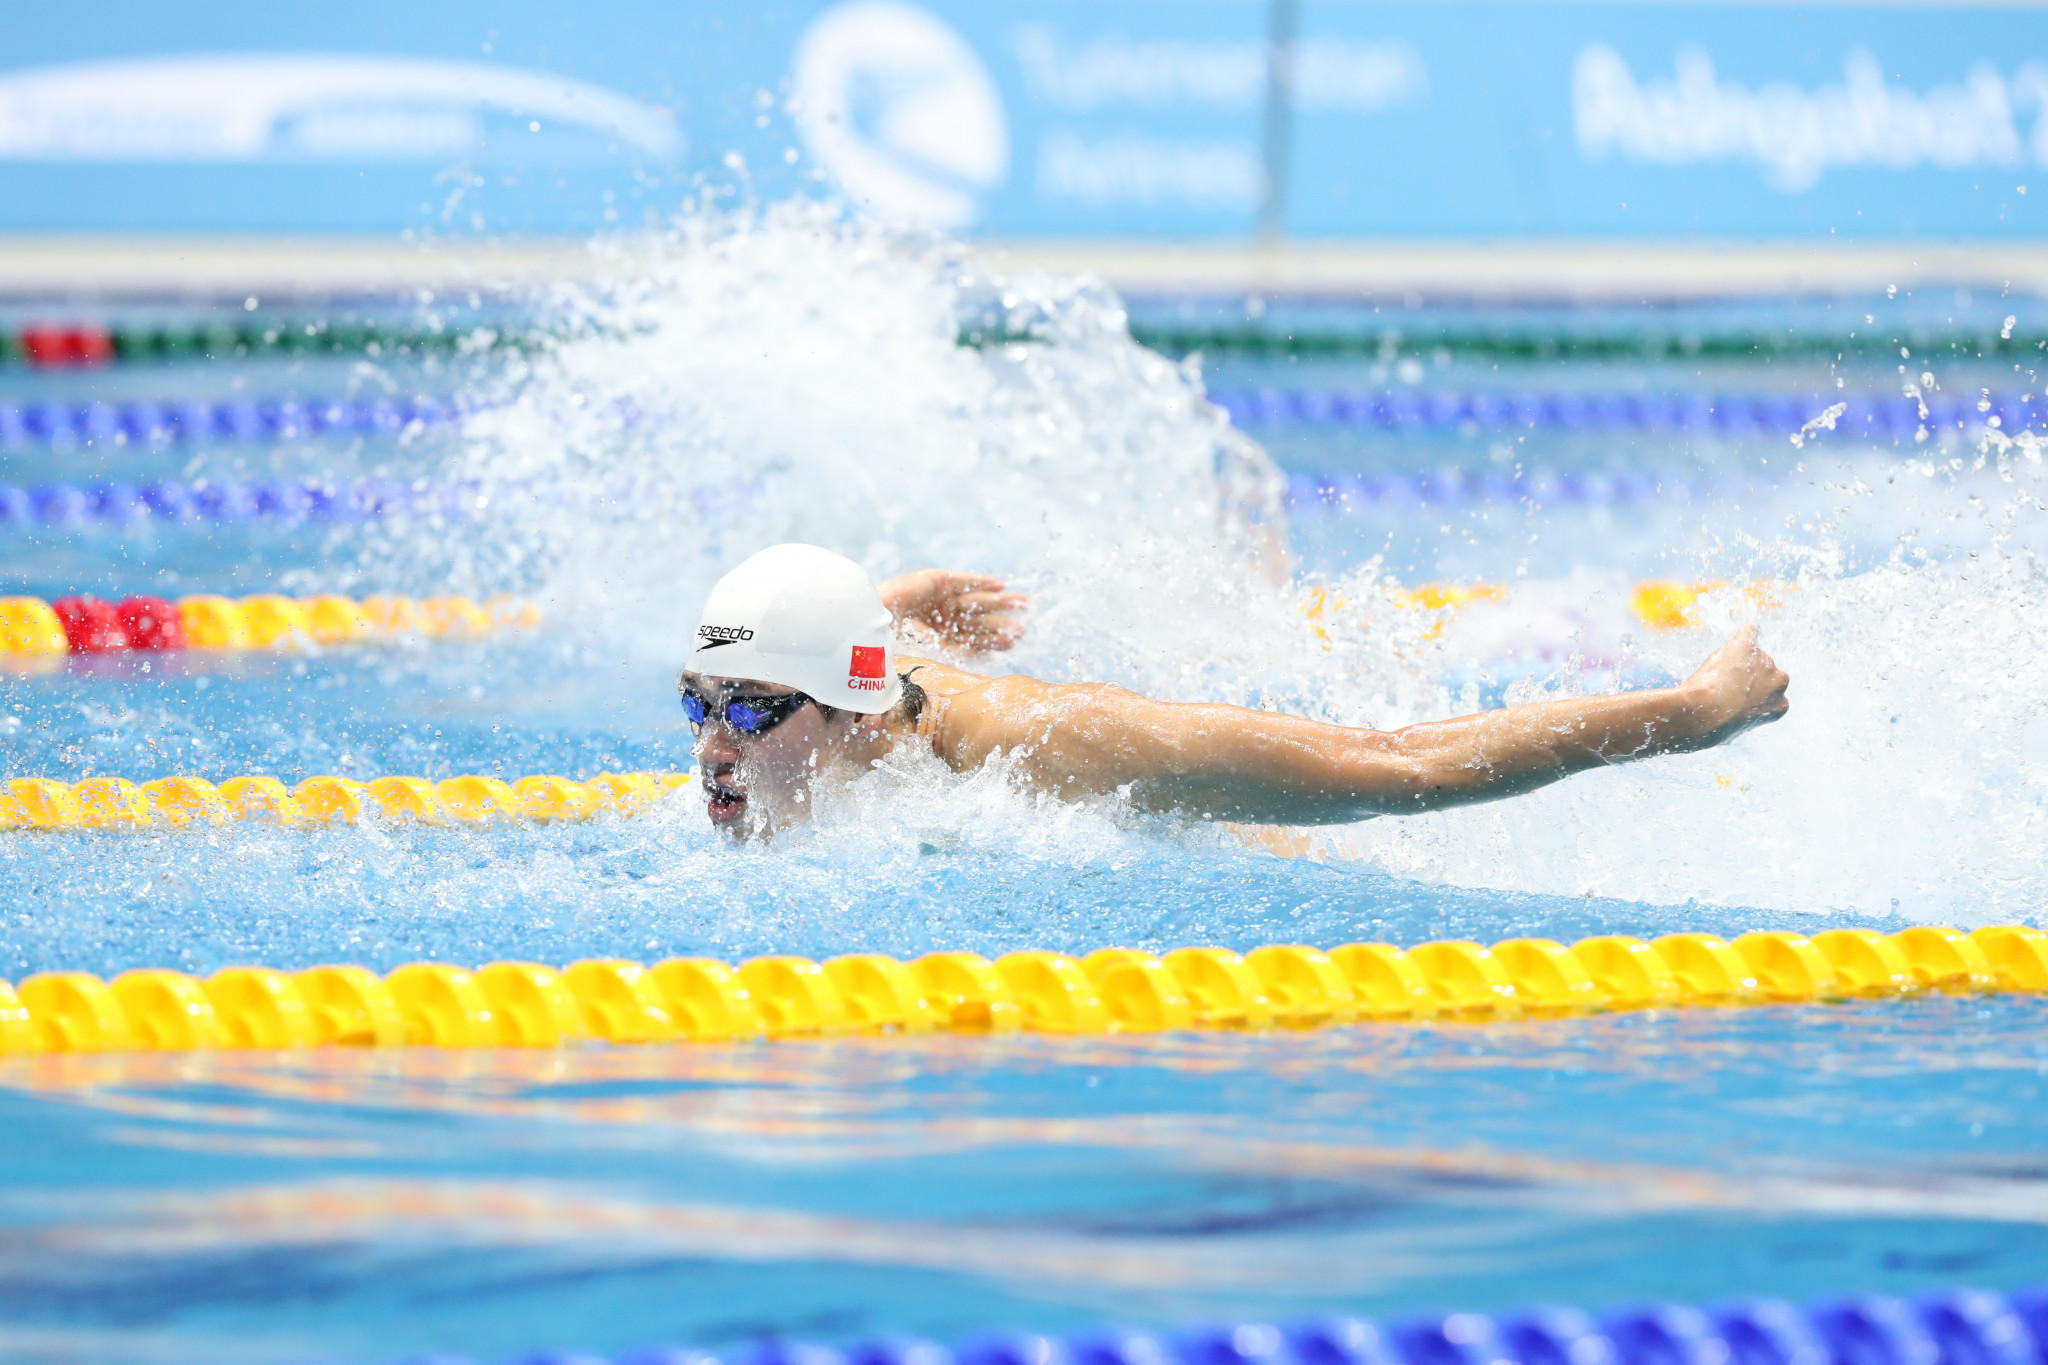 Wang twice breaks 100m breaststroke Games record on first day of Ashgabat 2017 short course swimming